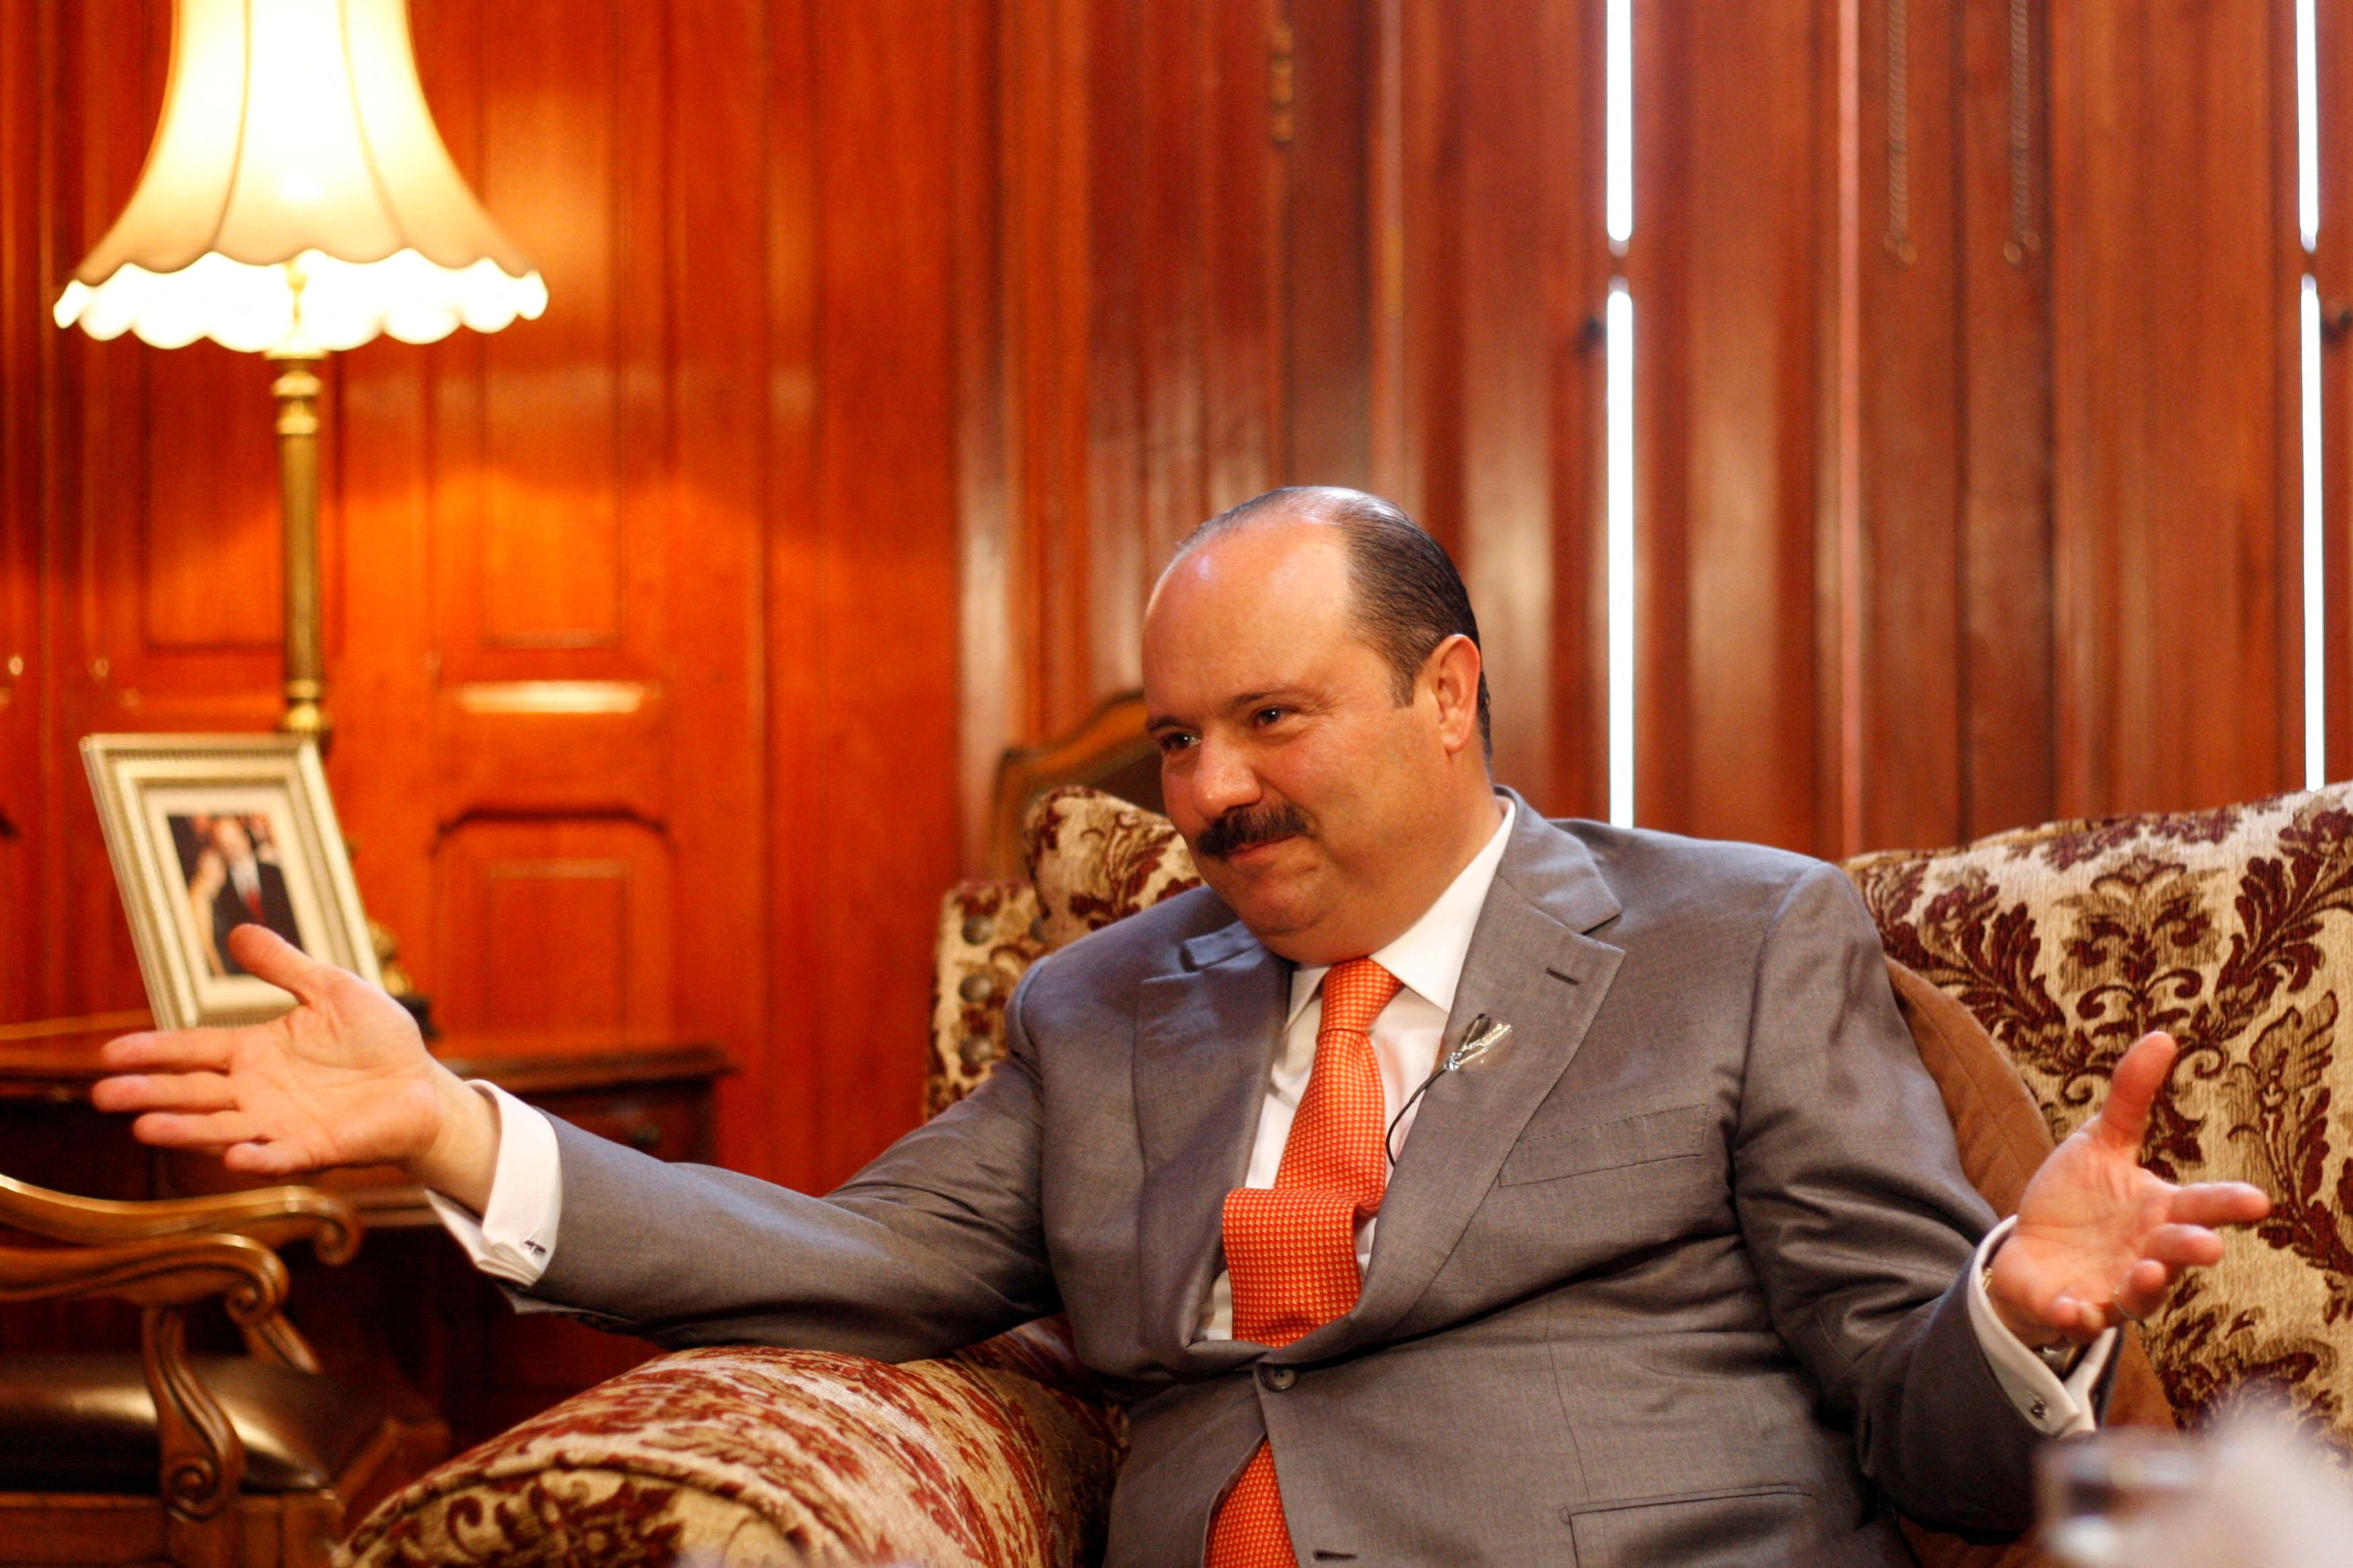 Duarte gestures during an interview at Government palace in Chihuahua